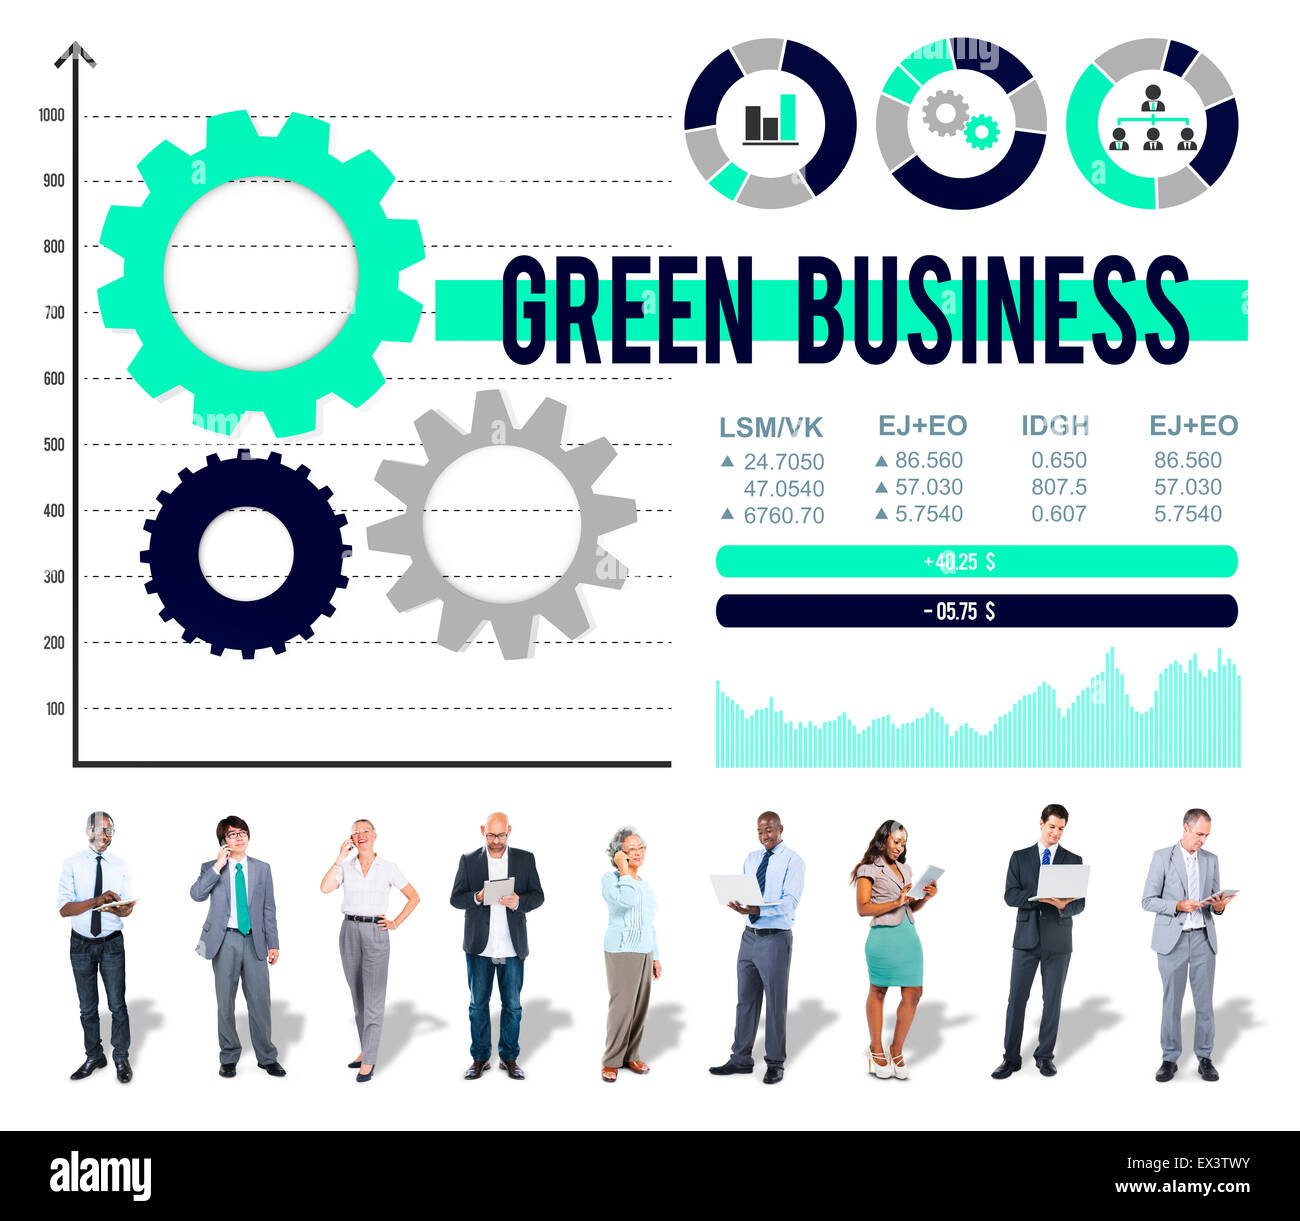 Green Business Environmental Conservation Finance Concept Stock Photo